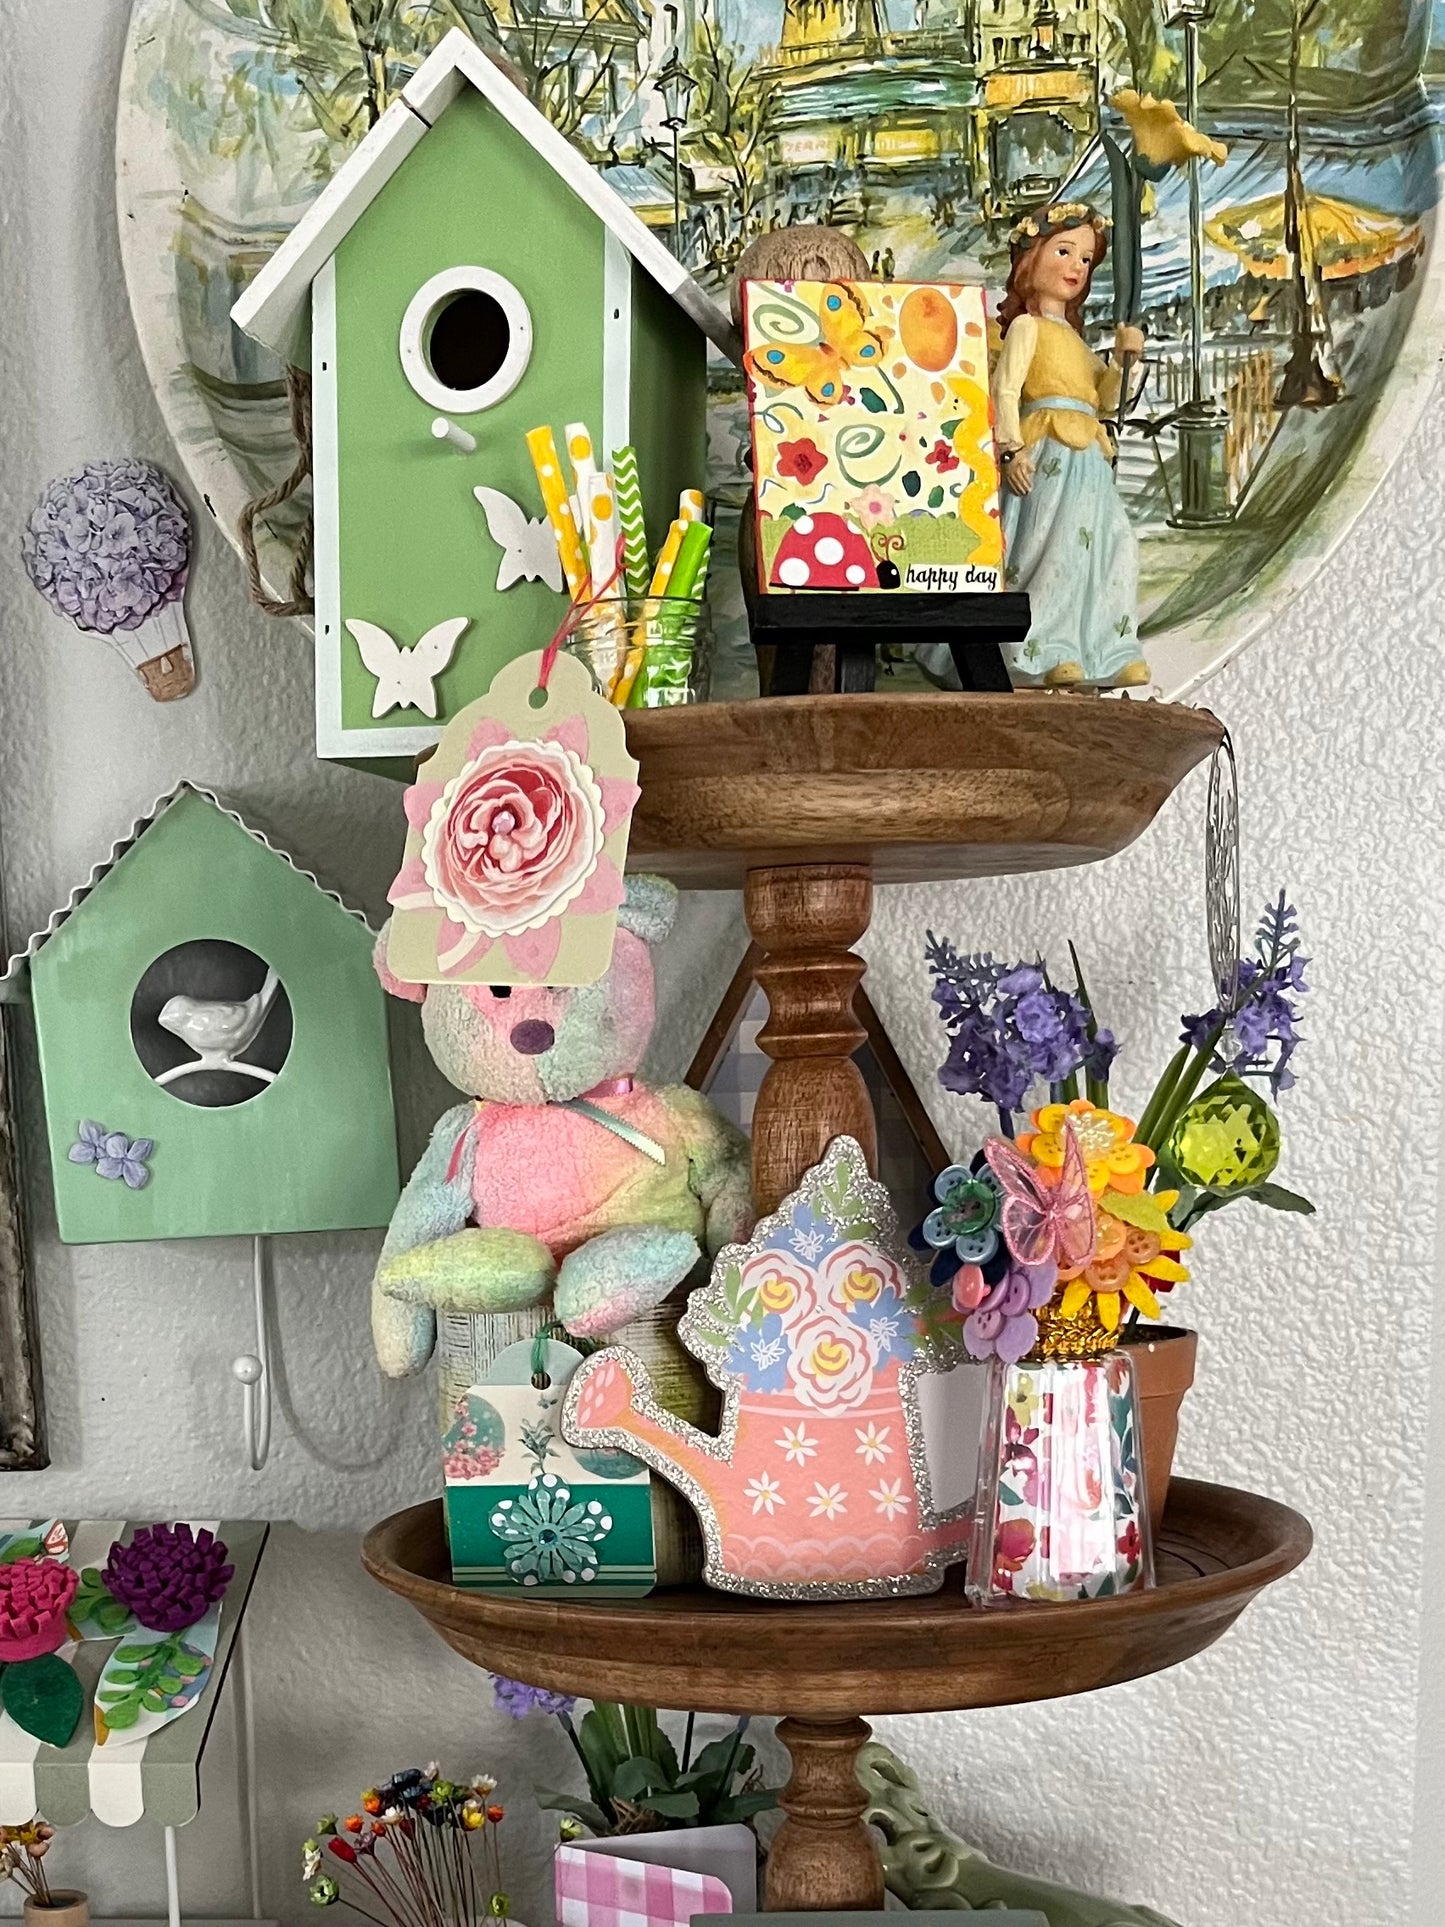 Vintage Style Adorable Small Green Birdhouse with butterfly appliqués